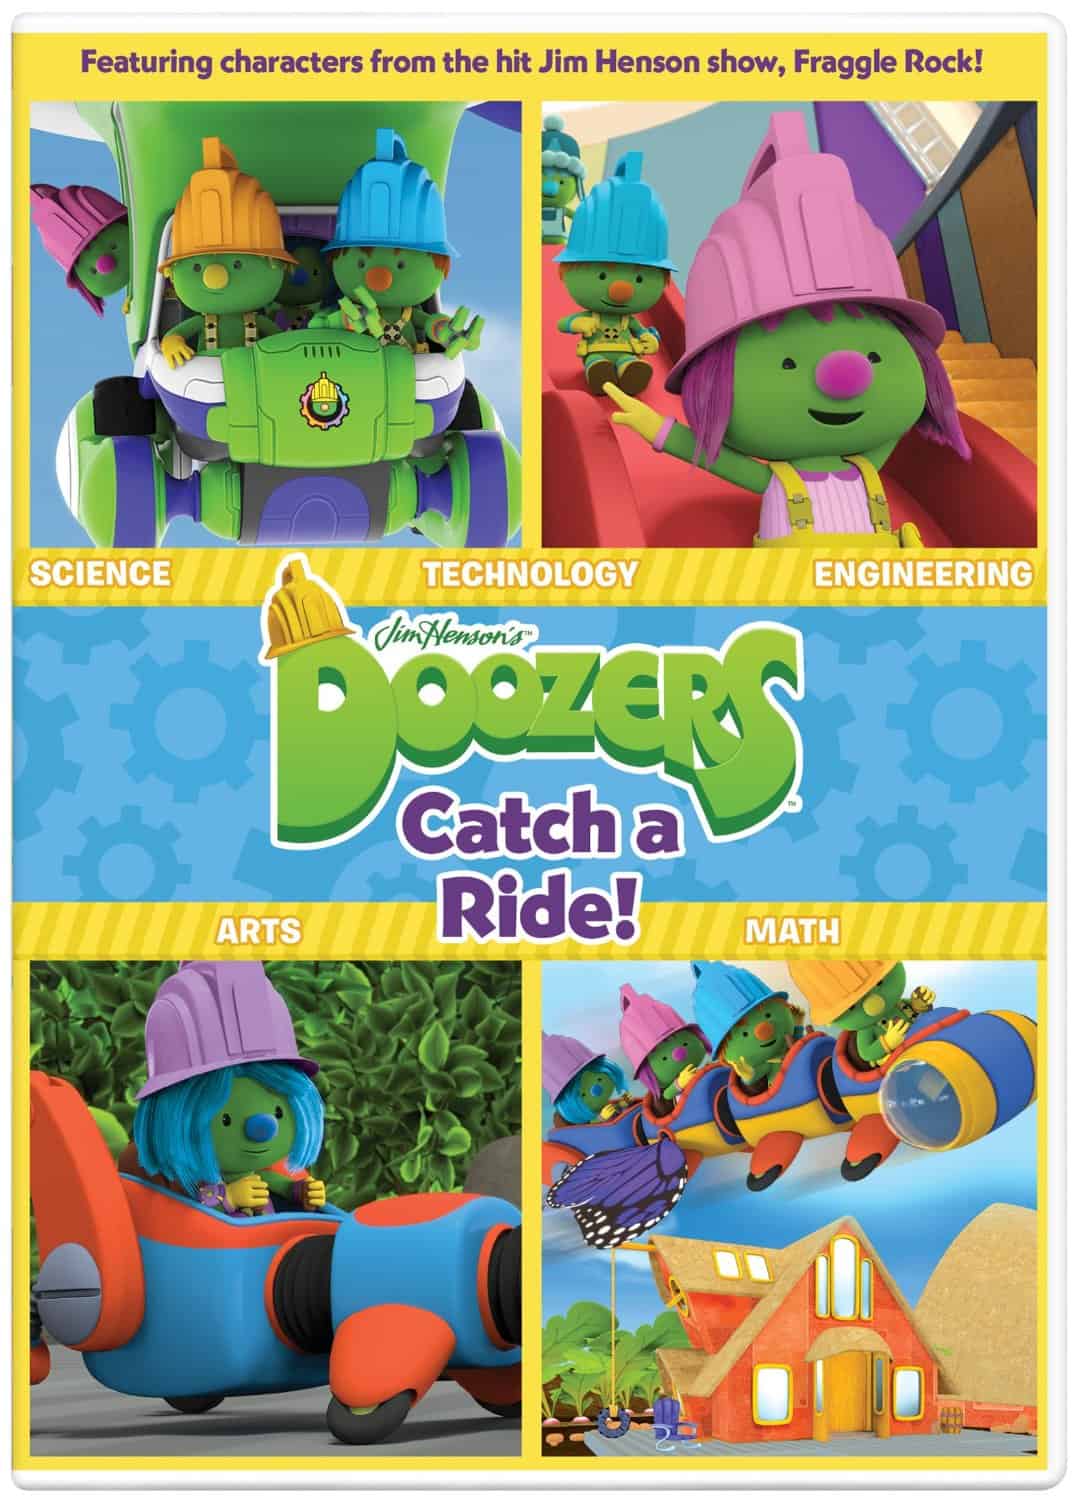 Doozers Catch a Ride DVD Review